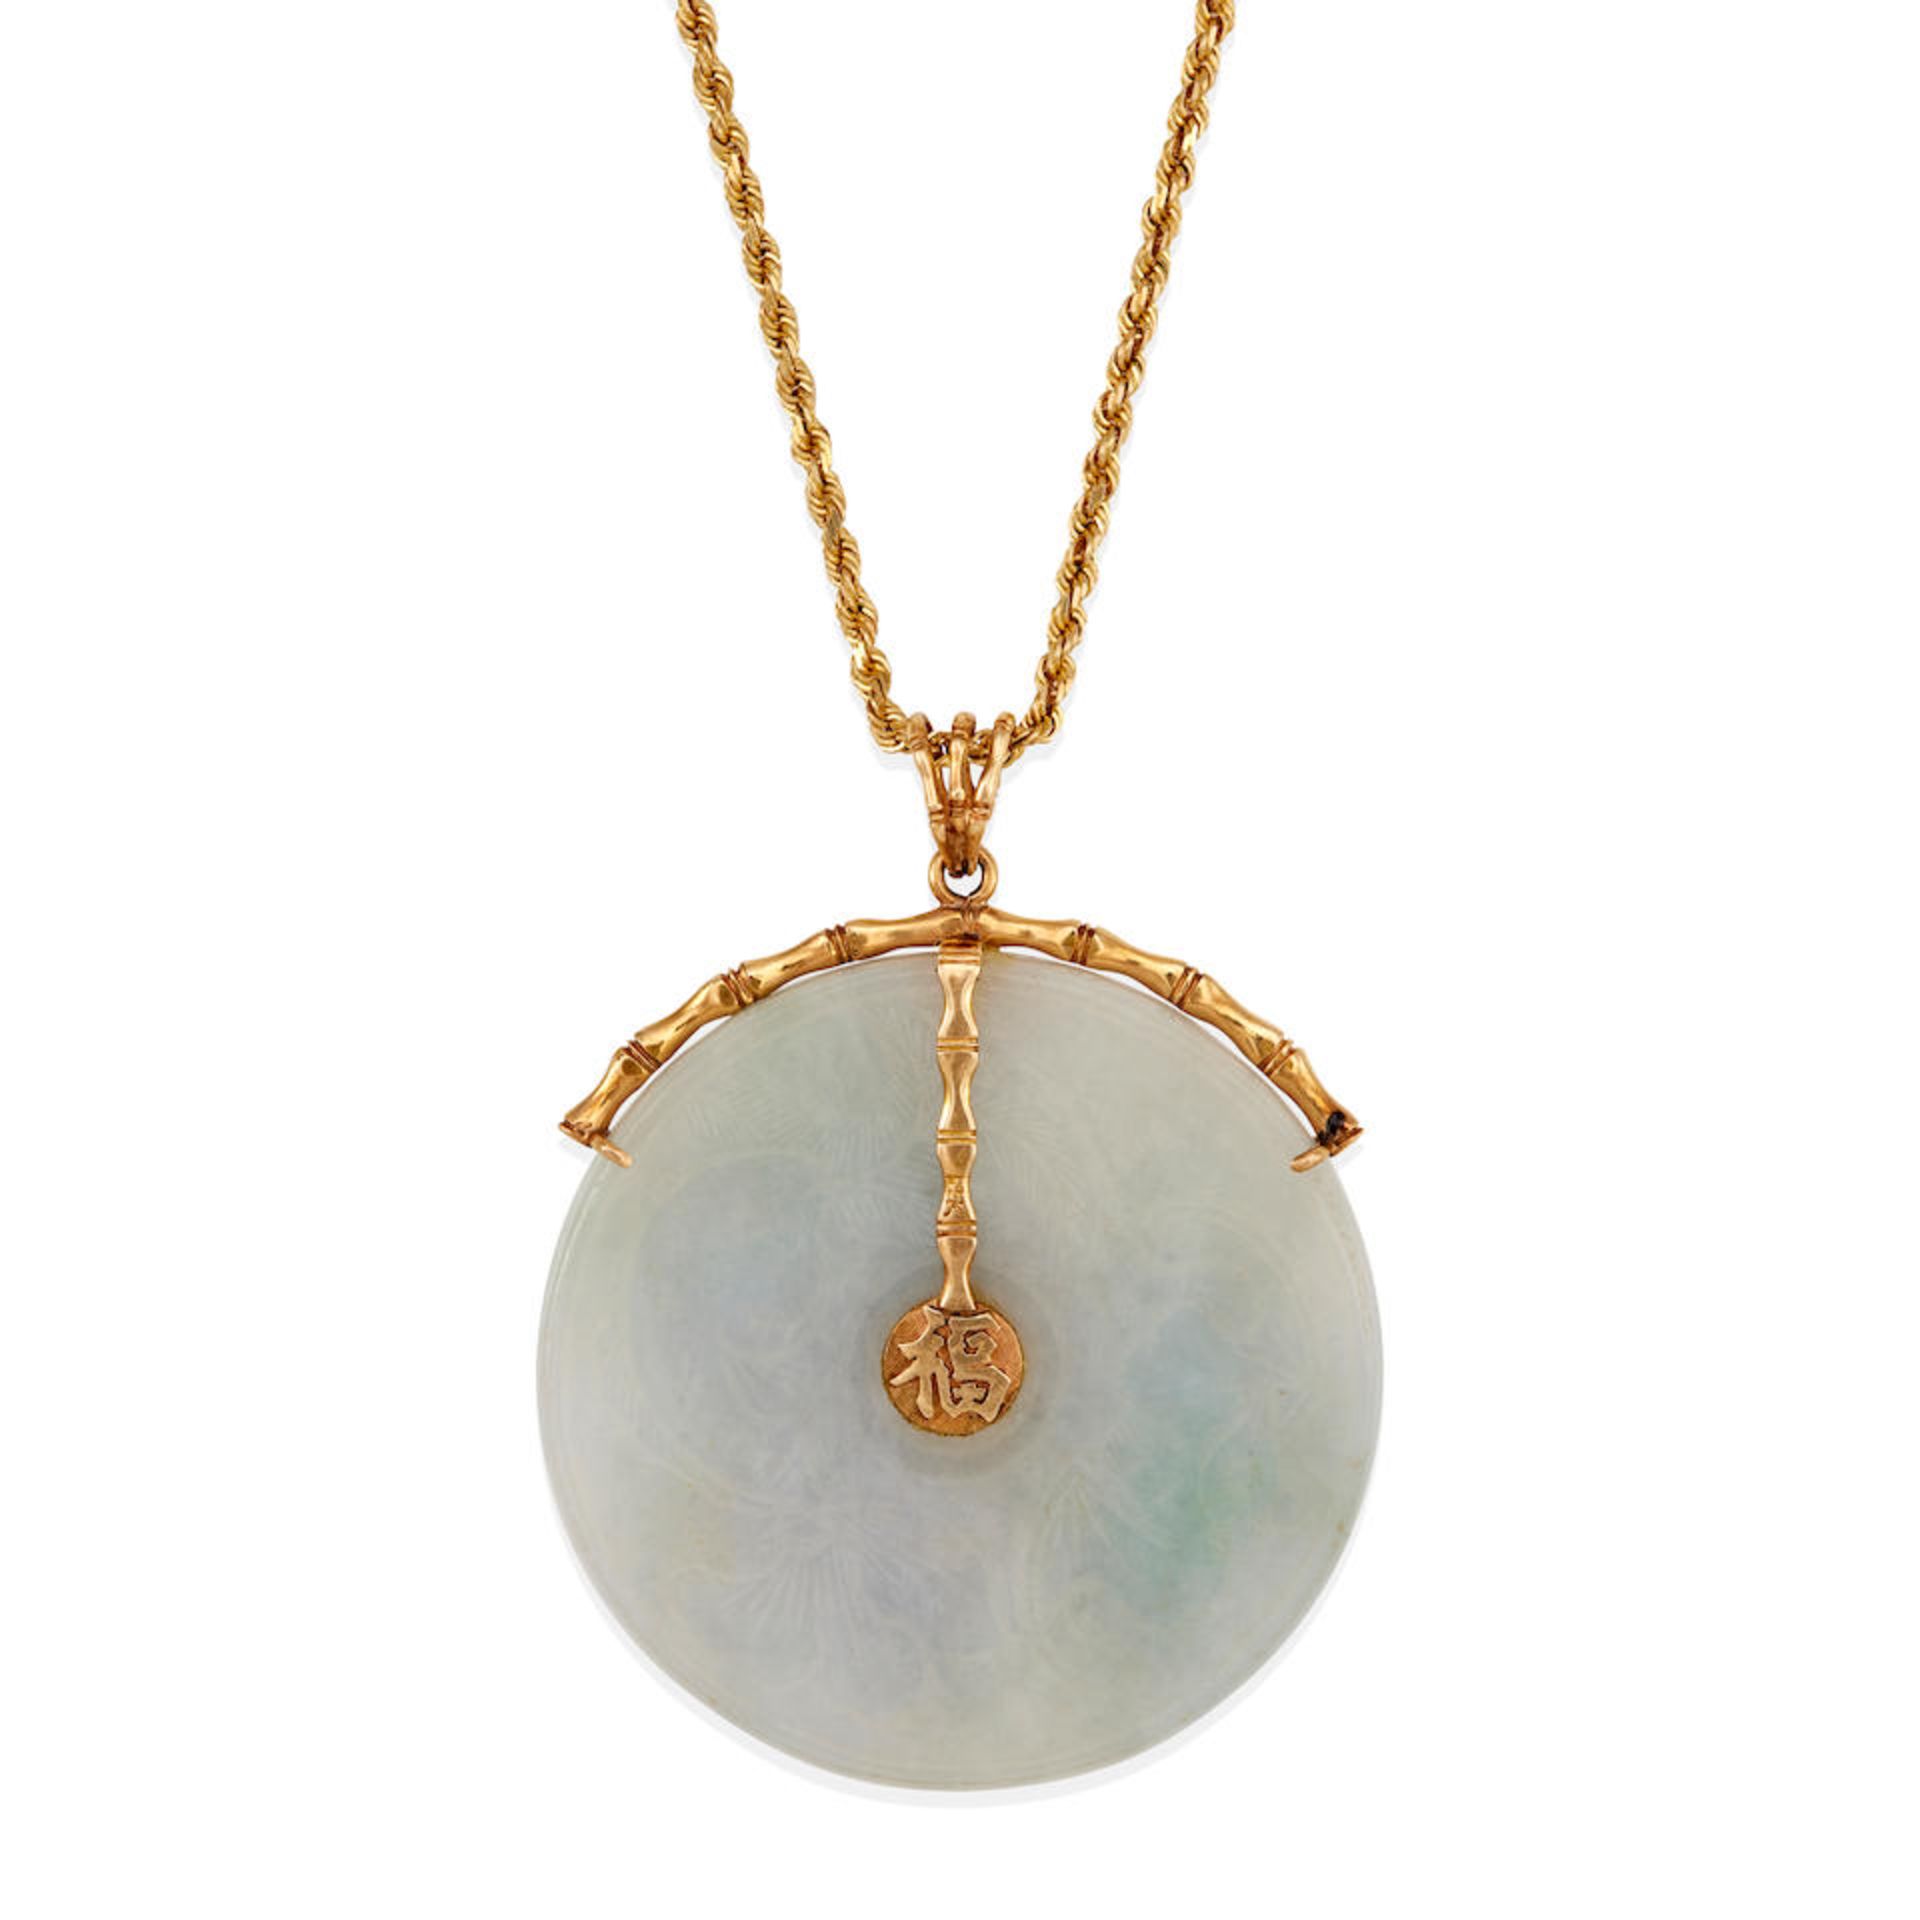 A 14K GOLD AND JADE PENDANT NECKLACE